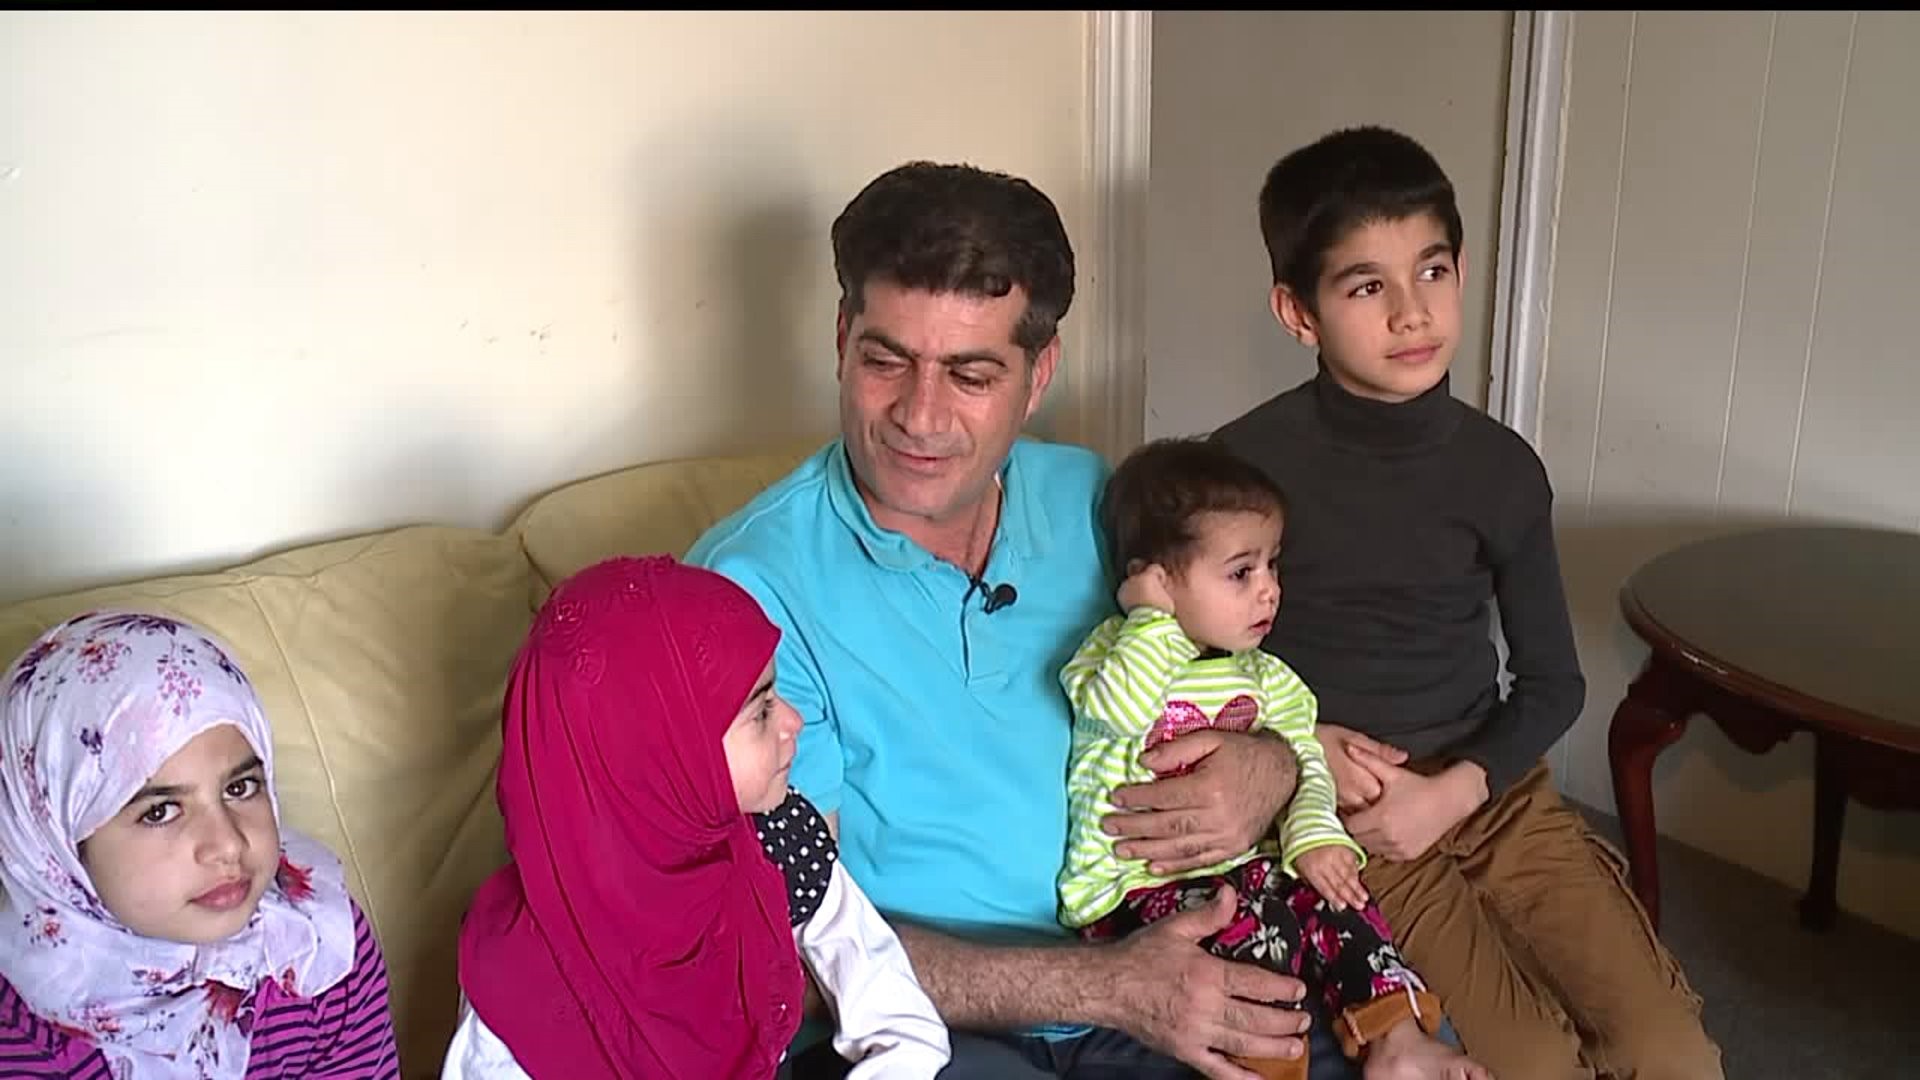 Syrian family reacts to U.S. military strike, temporary travel ban